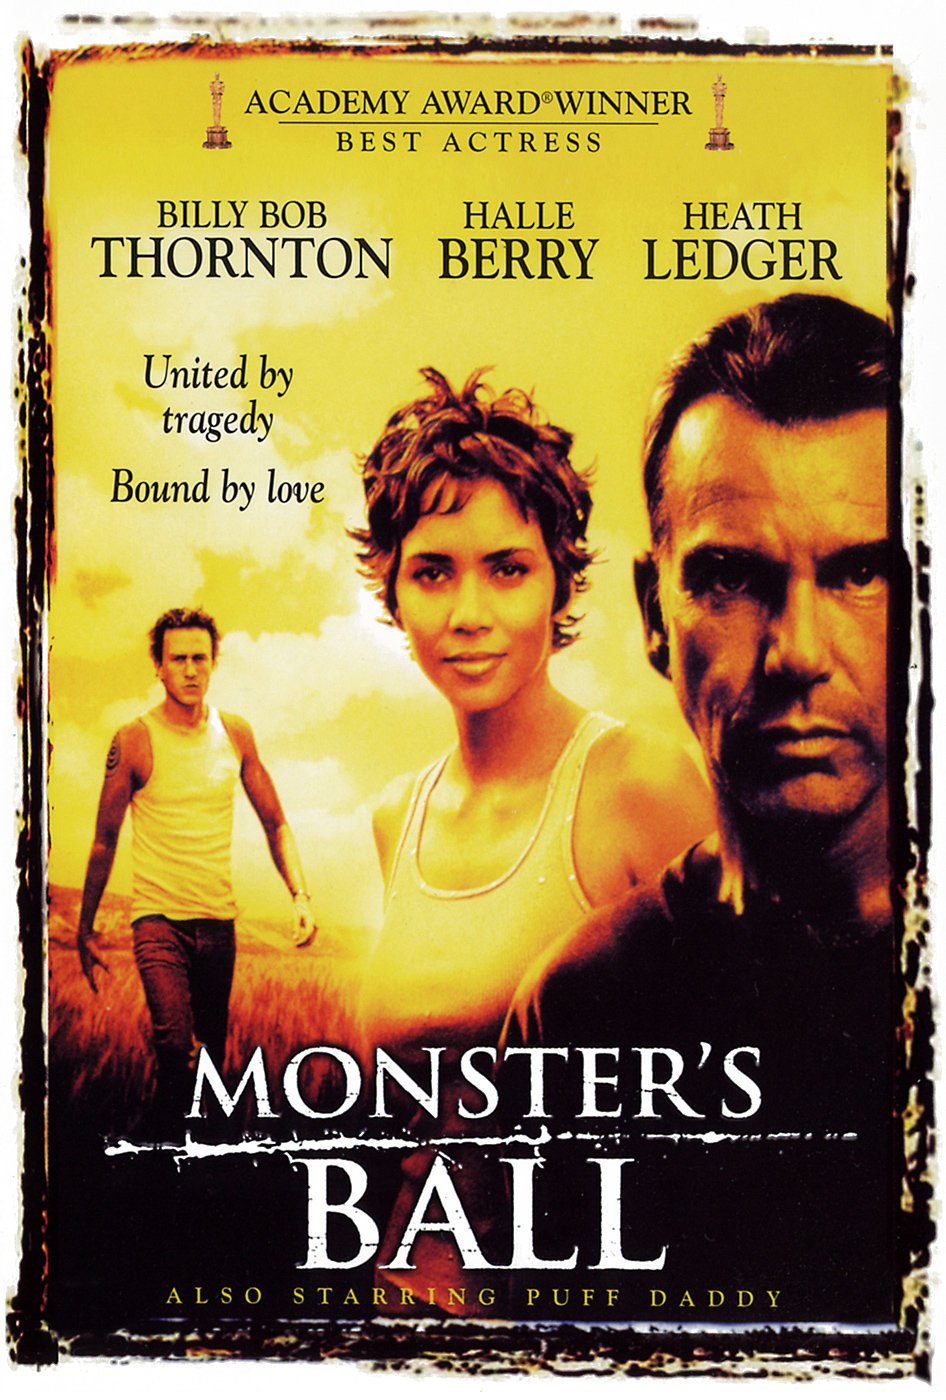 Poster of the movie Monster's Ball